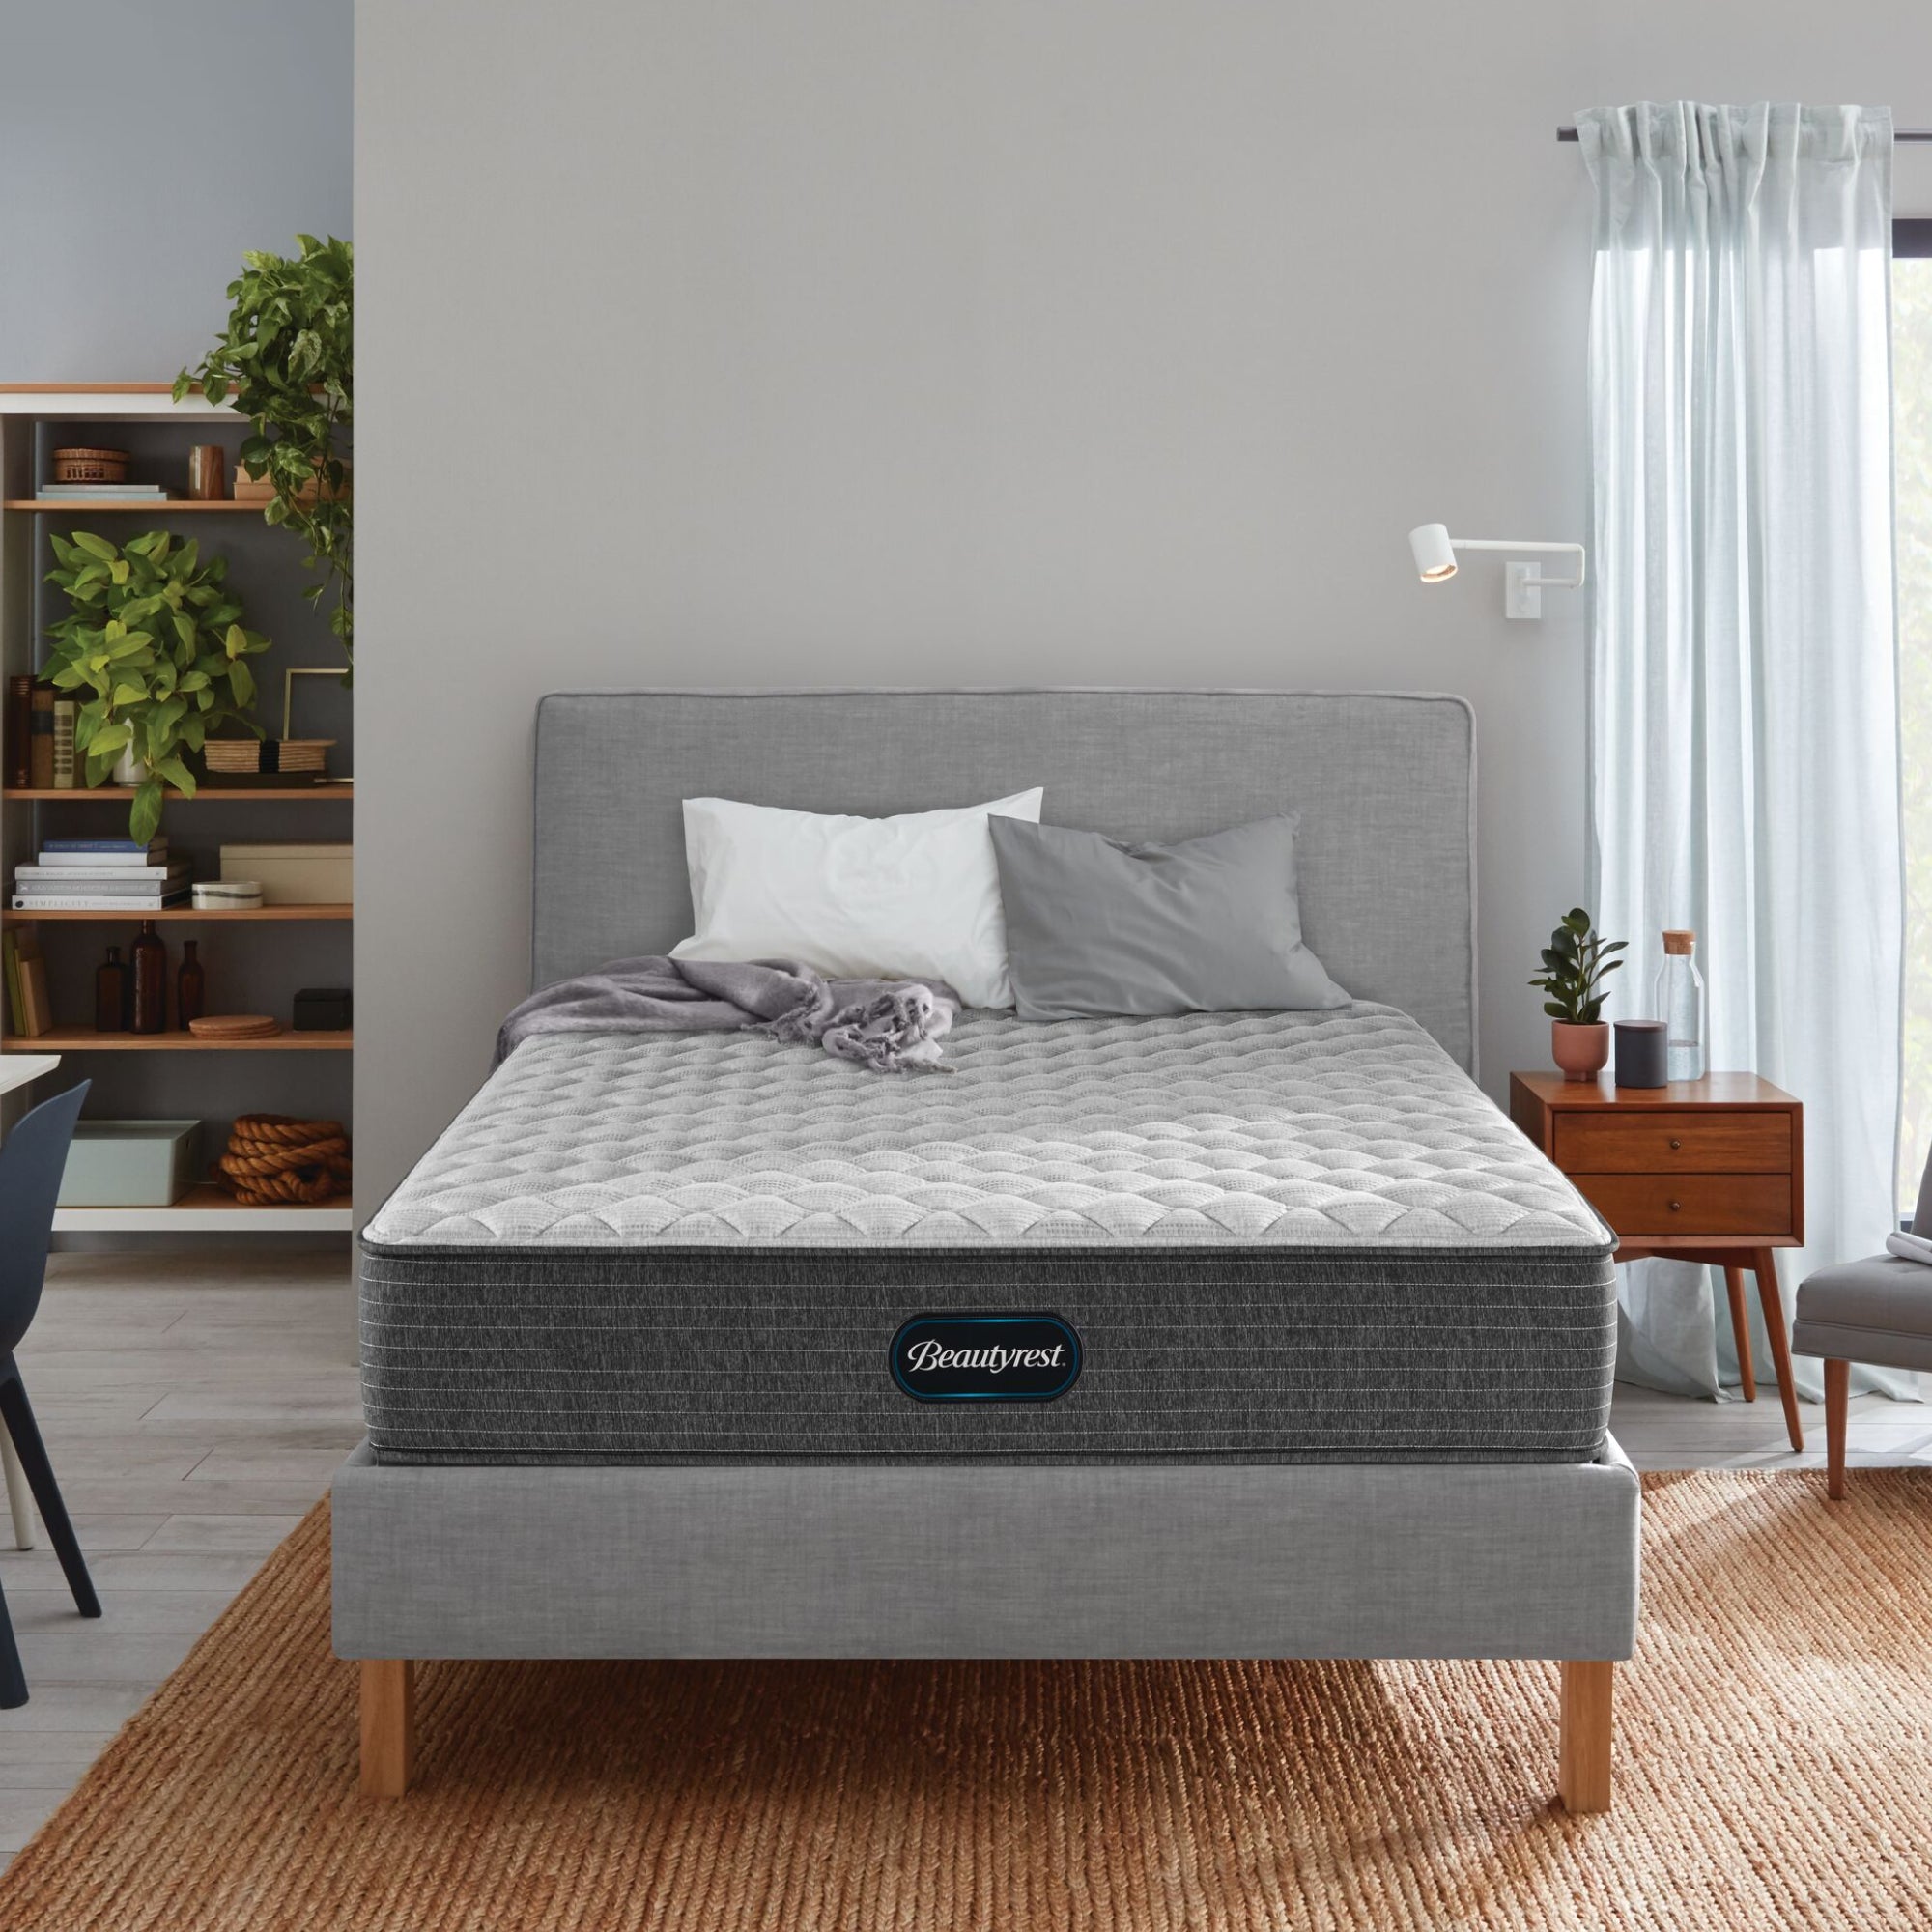 The Beautyrest Select mattress in a bedroom || feel: Firm